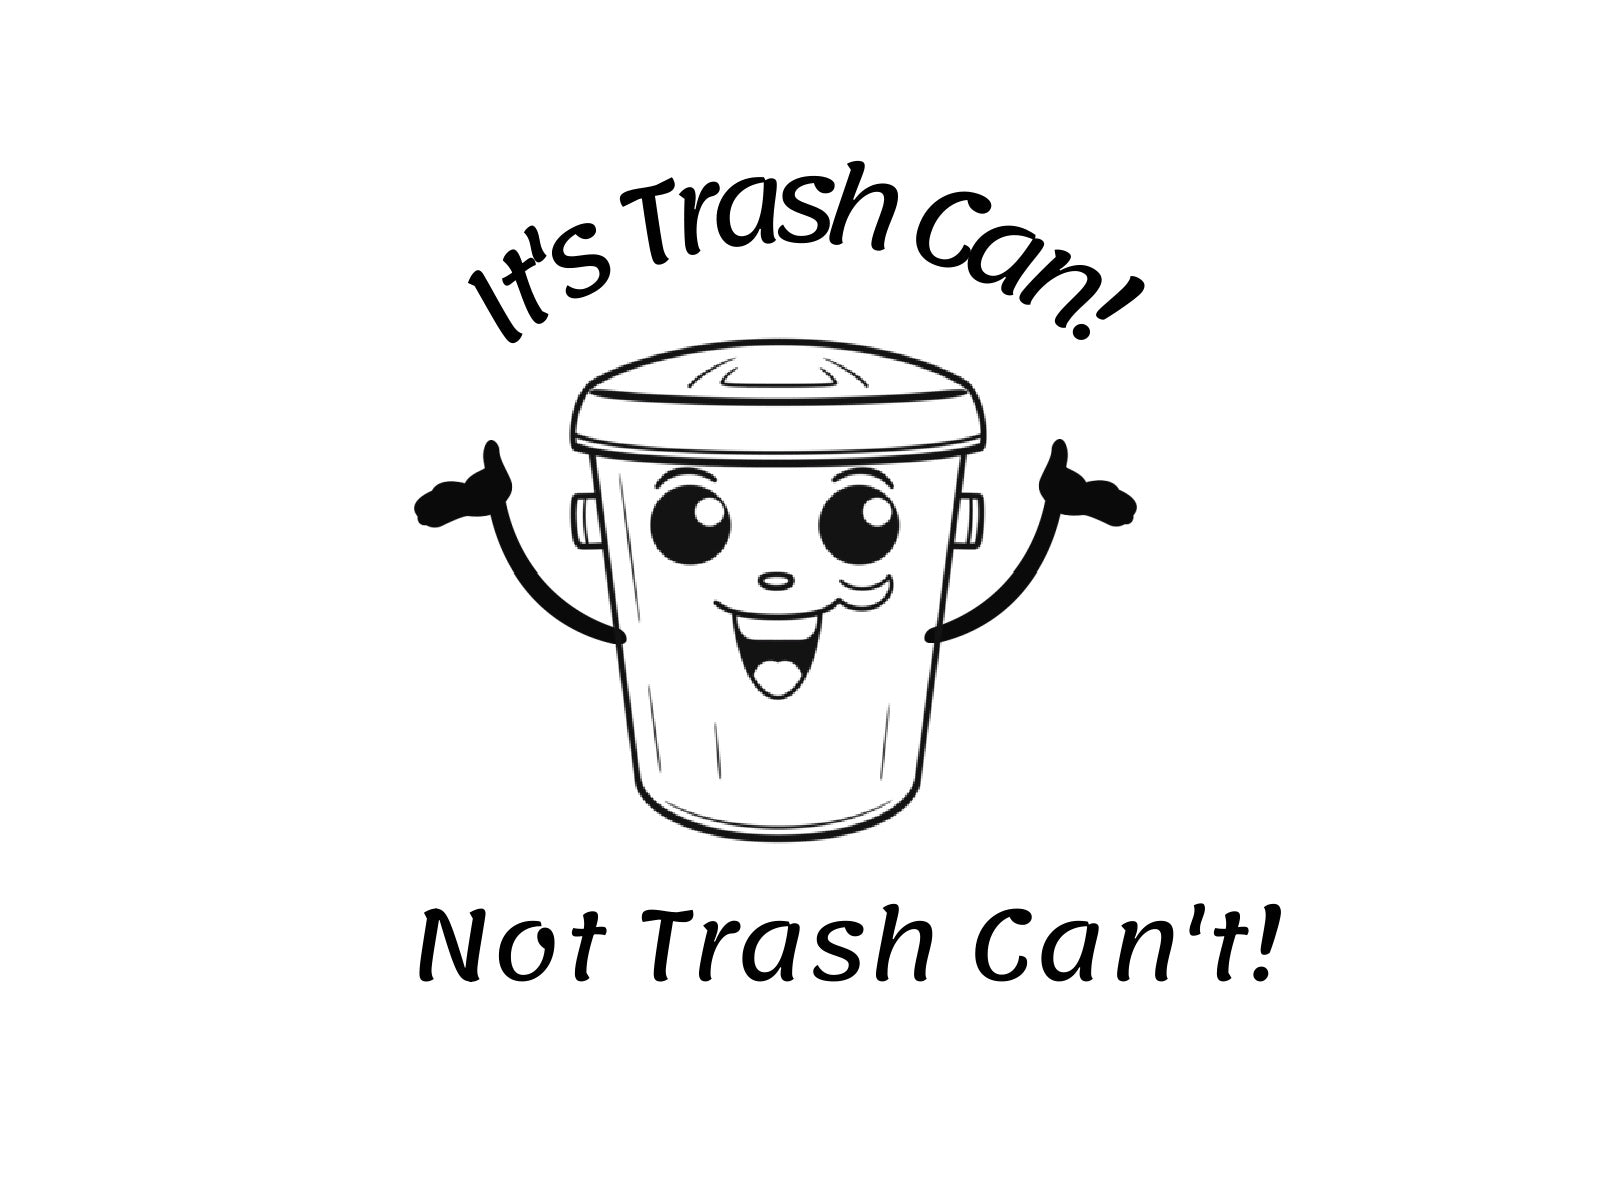 It's Trash Can! Not Trash Can't!